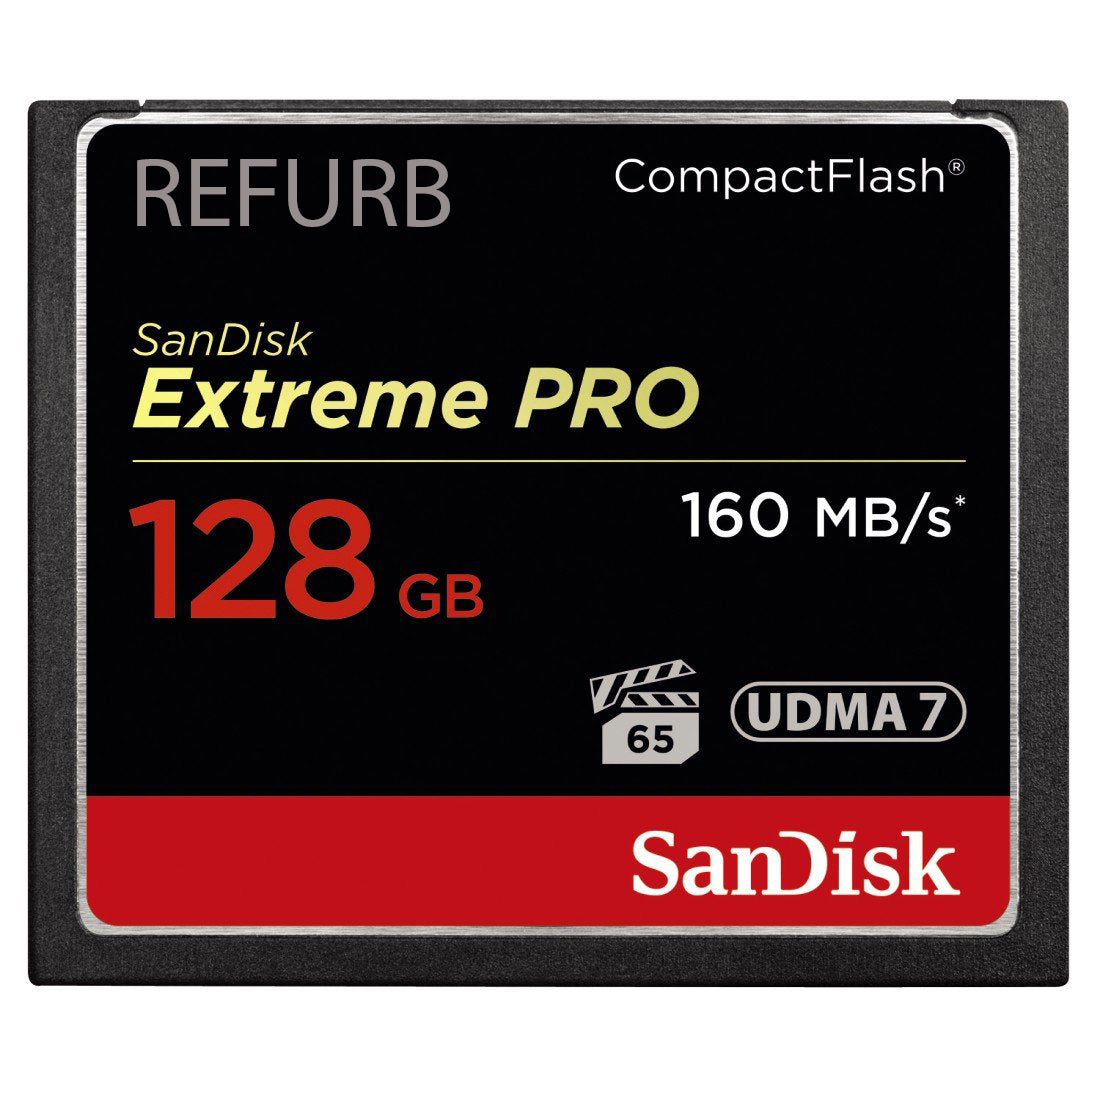 SanDisk Extreme PRO 128GB CF CompactFlash Card UDMA 7 Speed Up To 160MB/s SDCFXPS-128G-X46 (Certified Refurbished)